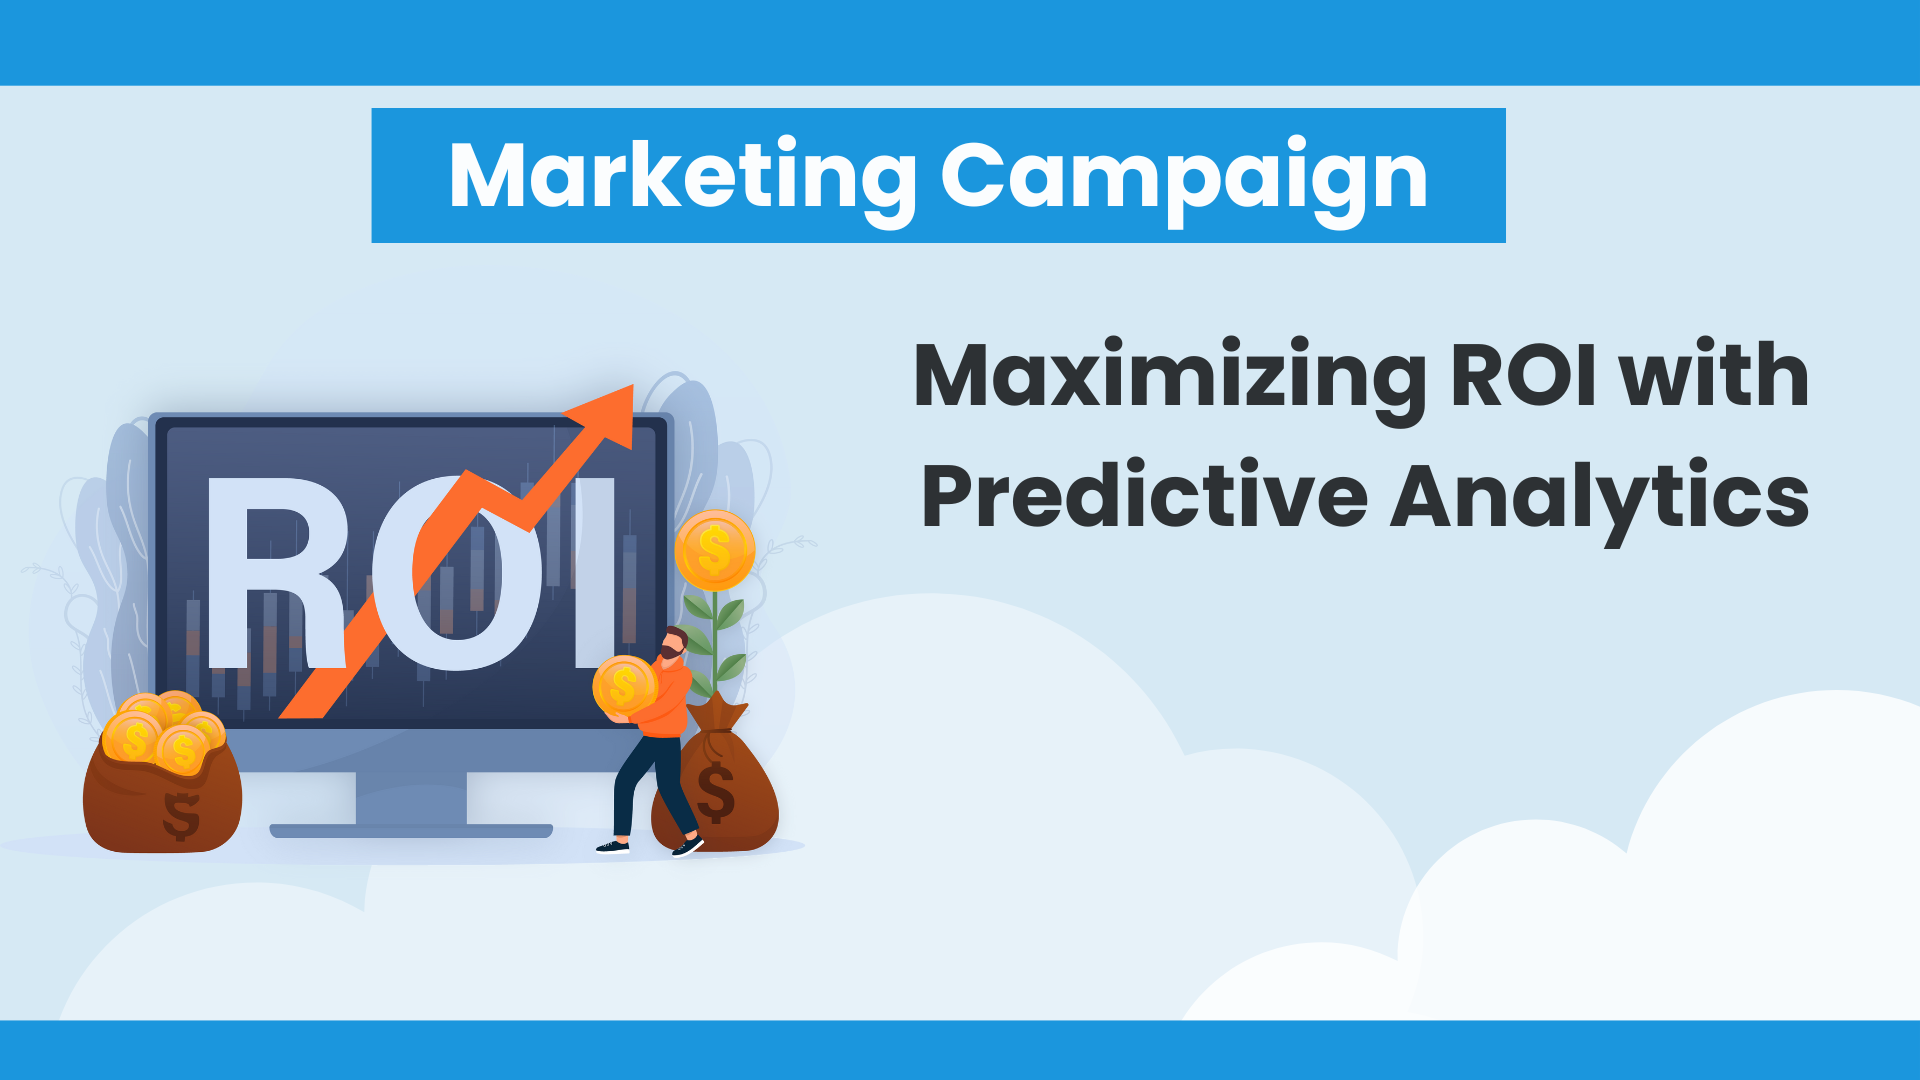 Maximizing ROI with Predictive Analytics in Marketing Campaigns